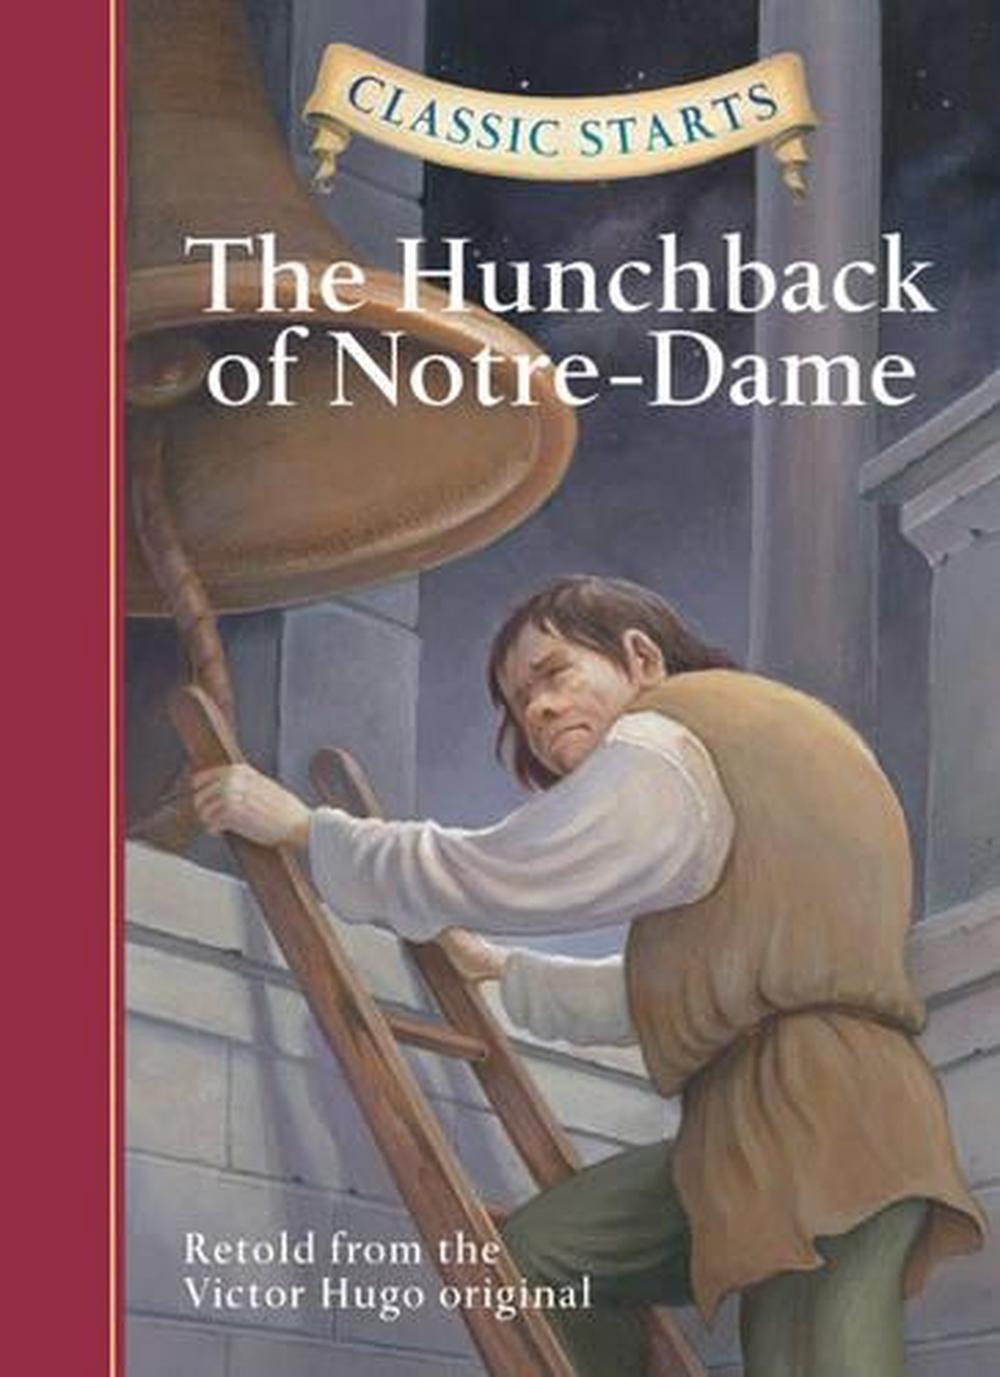 The Hunchback of Notre Dame by Deanna McFadden, Hardcover